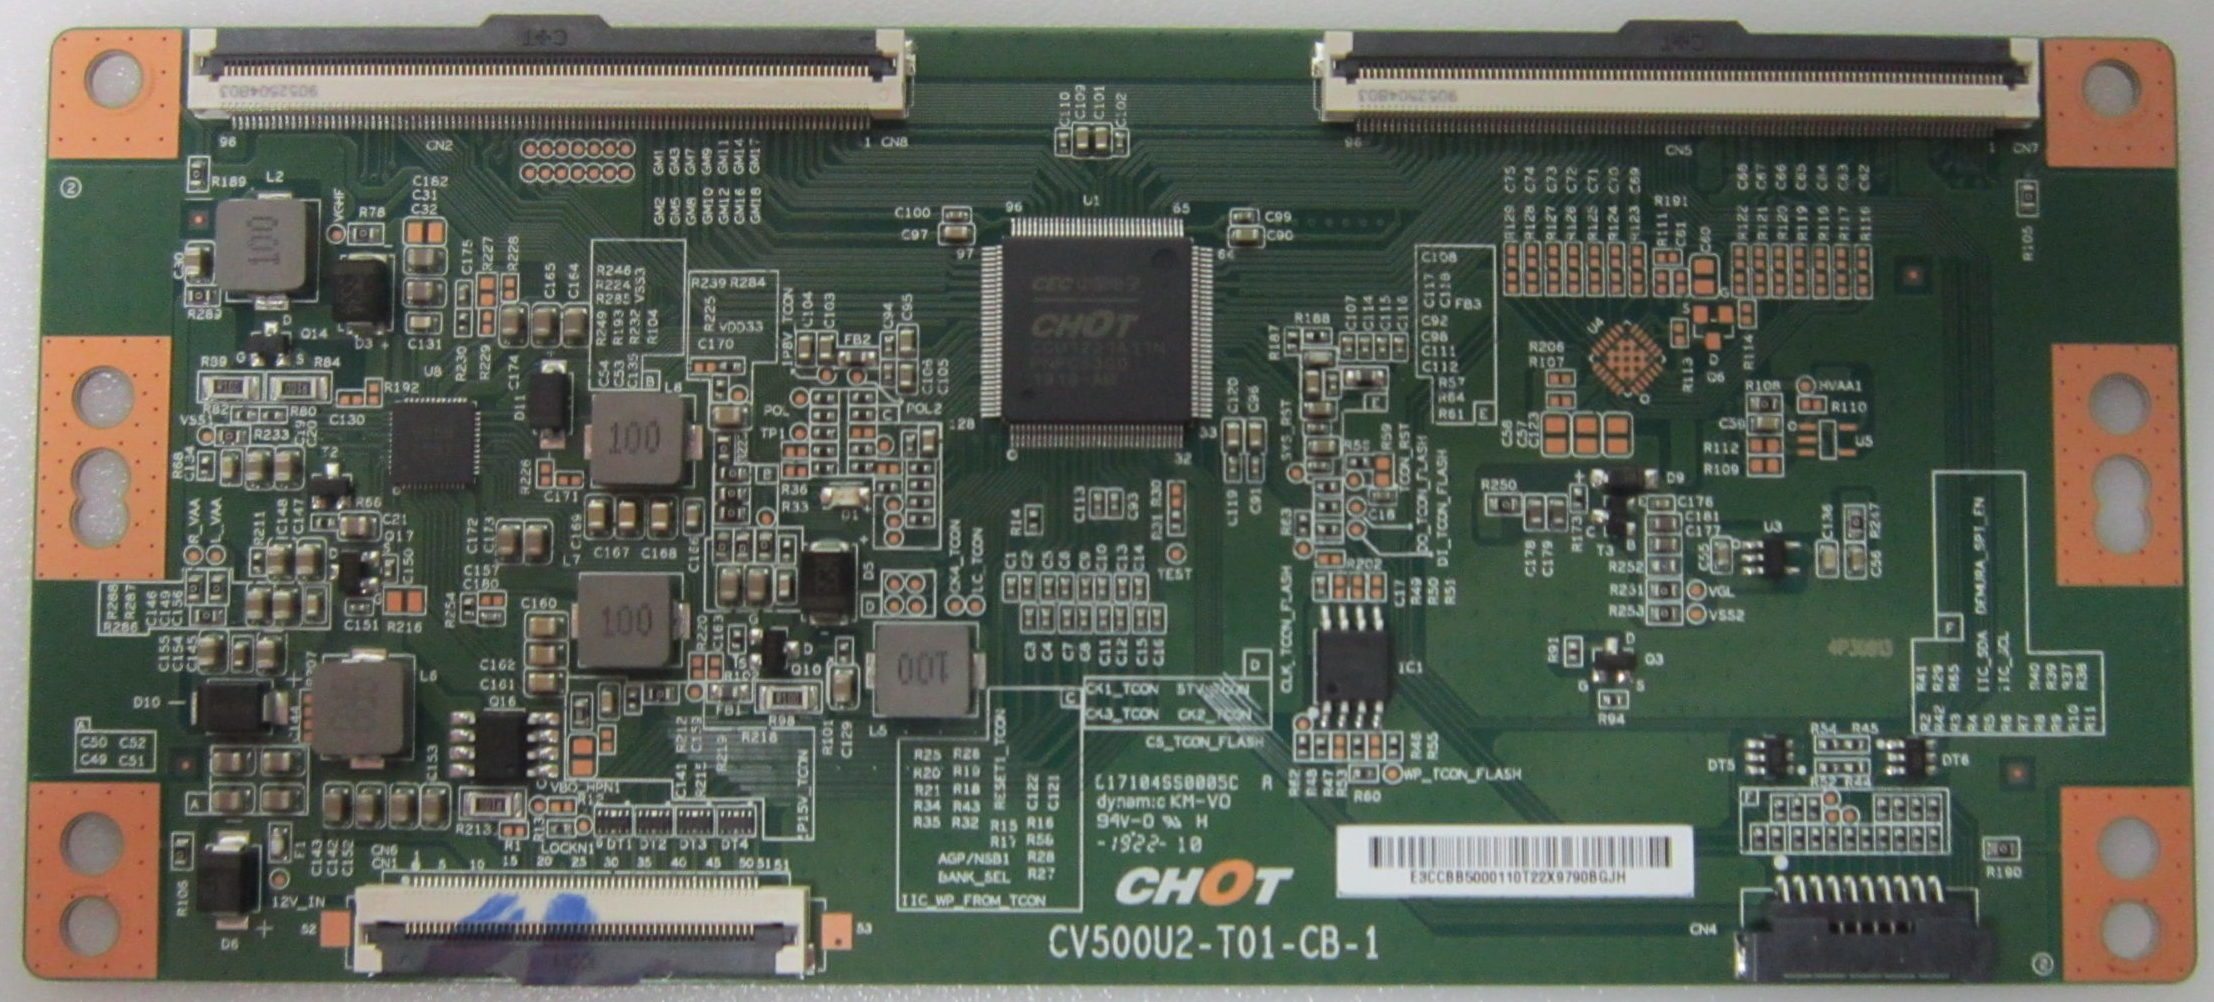 Toshiba 50LF711U20 Hisense 50R6E3 T-Con Board CV500U2-T01-CB-1 - image 1 of 3